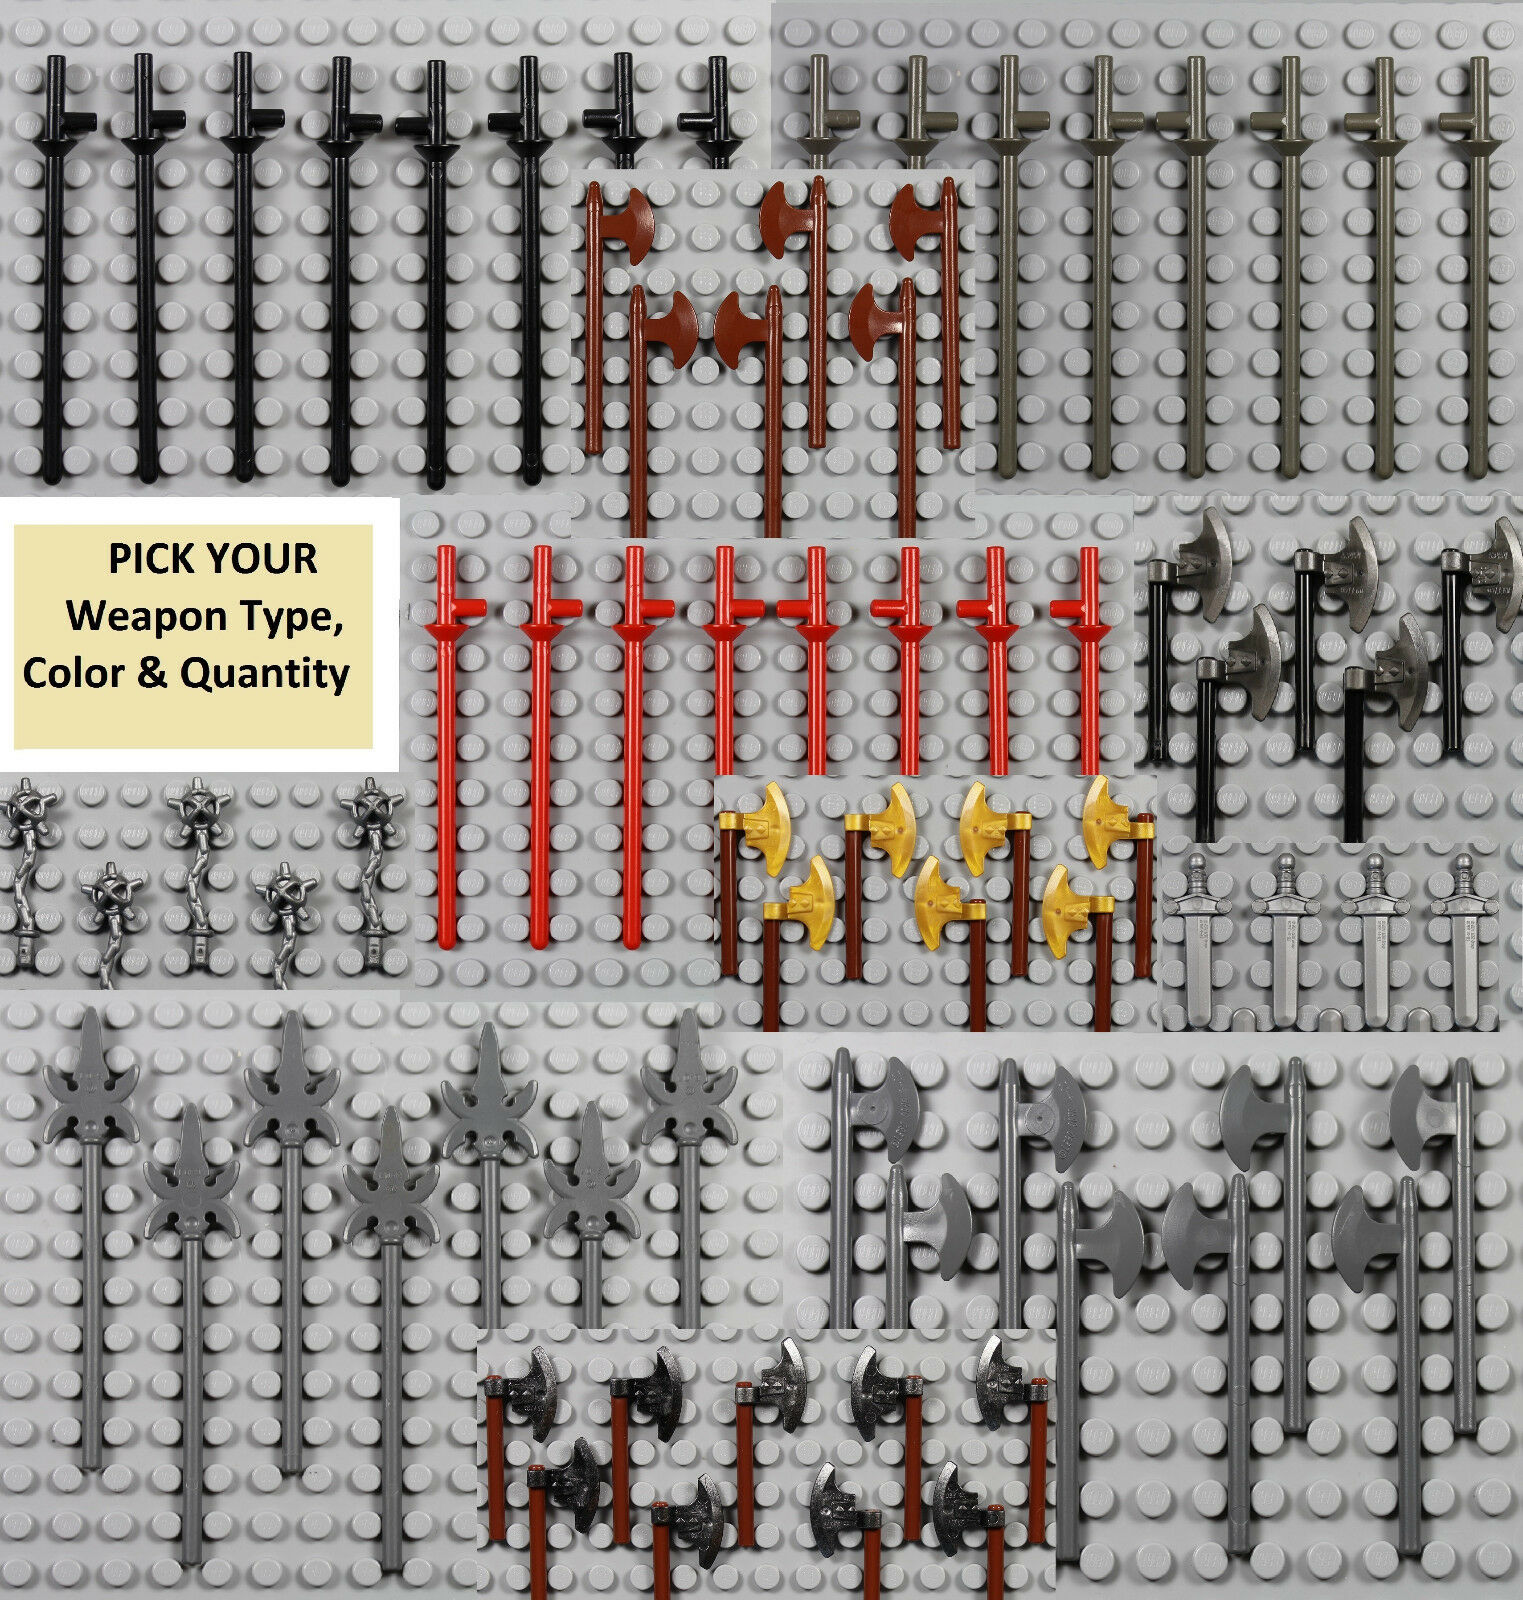 Lego - Pick Your Weapon - Minifigure Castle Knight Viking Medieval Lot Lance Axe